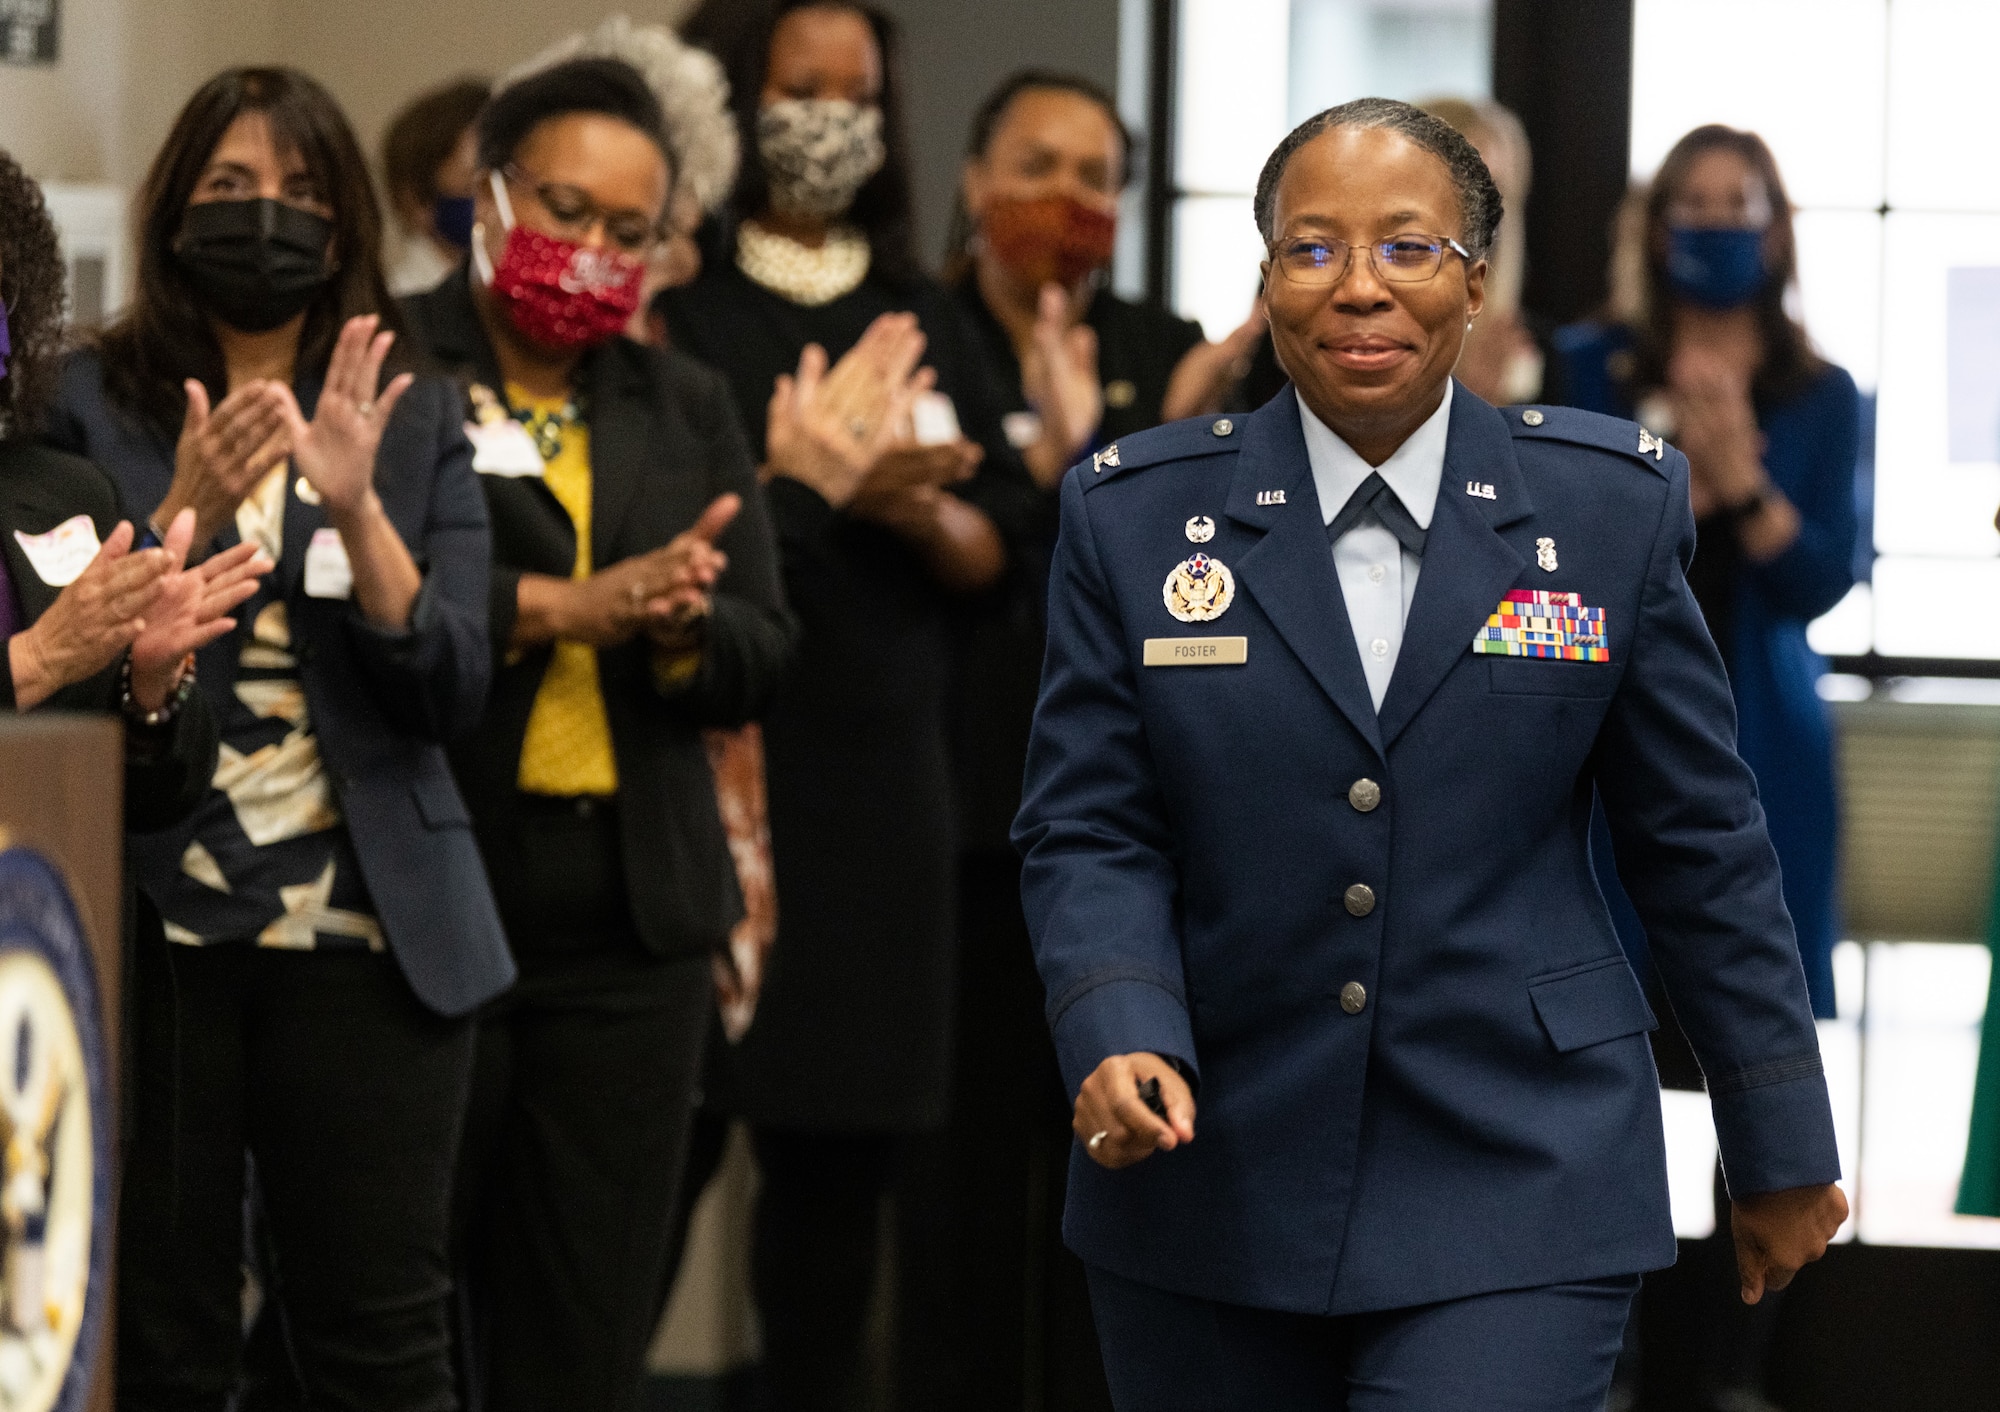 Col. Gwendolyn Foster, 60th Medical Group commander, walks down to receive California’s 3rd Congressional District’s “Women of the Year” award Nov. 9, 2021, at Woodland Community College. Also receiving the award was Col. Erin Cook, 349th Maintenance Group commander.  Both women are senior leaders stationed at Travis Air Force Base, California. (U.S. Air Force Photo by Grant Okubo)